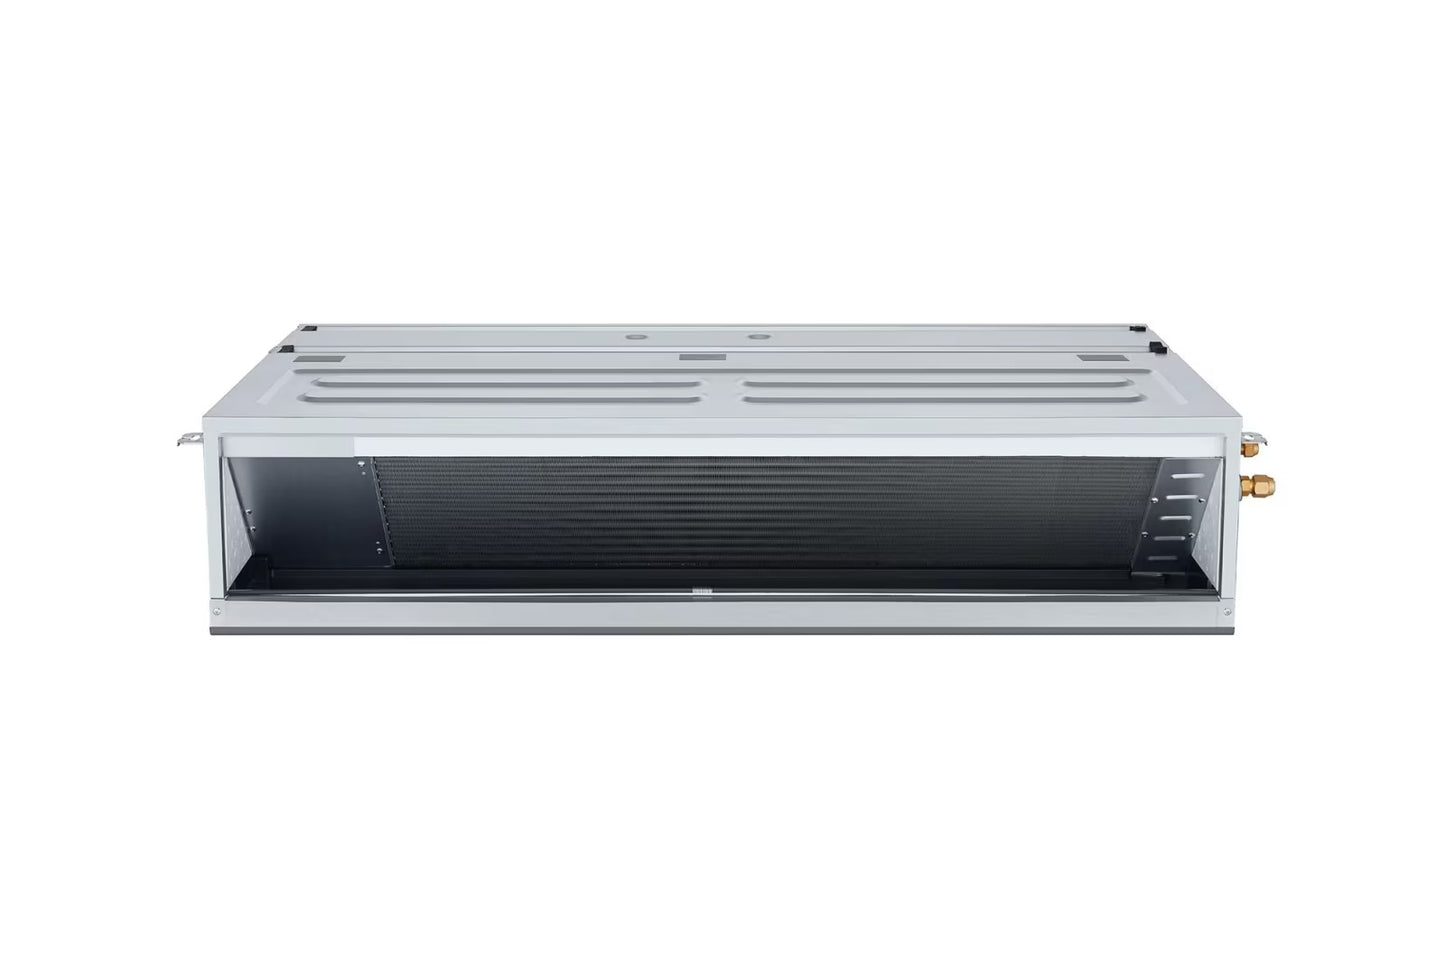 LG Ceiling Concealed Duct INV Unit 2.2KW with Mid Static and E.S.P. Control for Multiple Rooms - ARNU07GM1A4